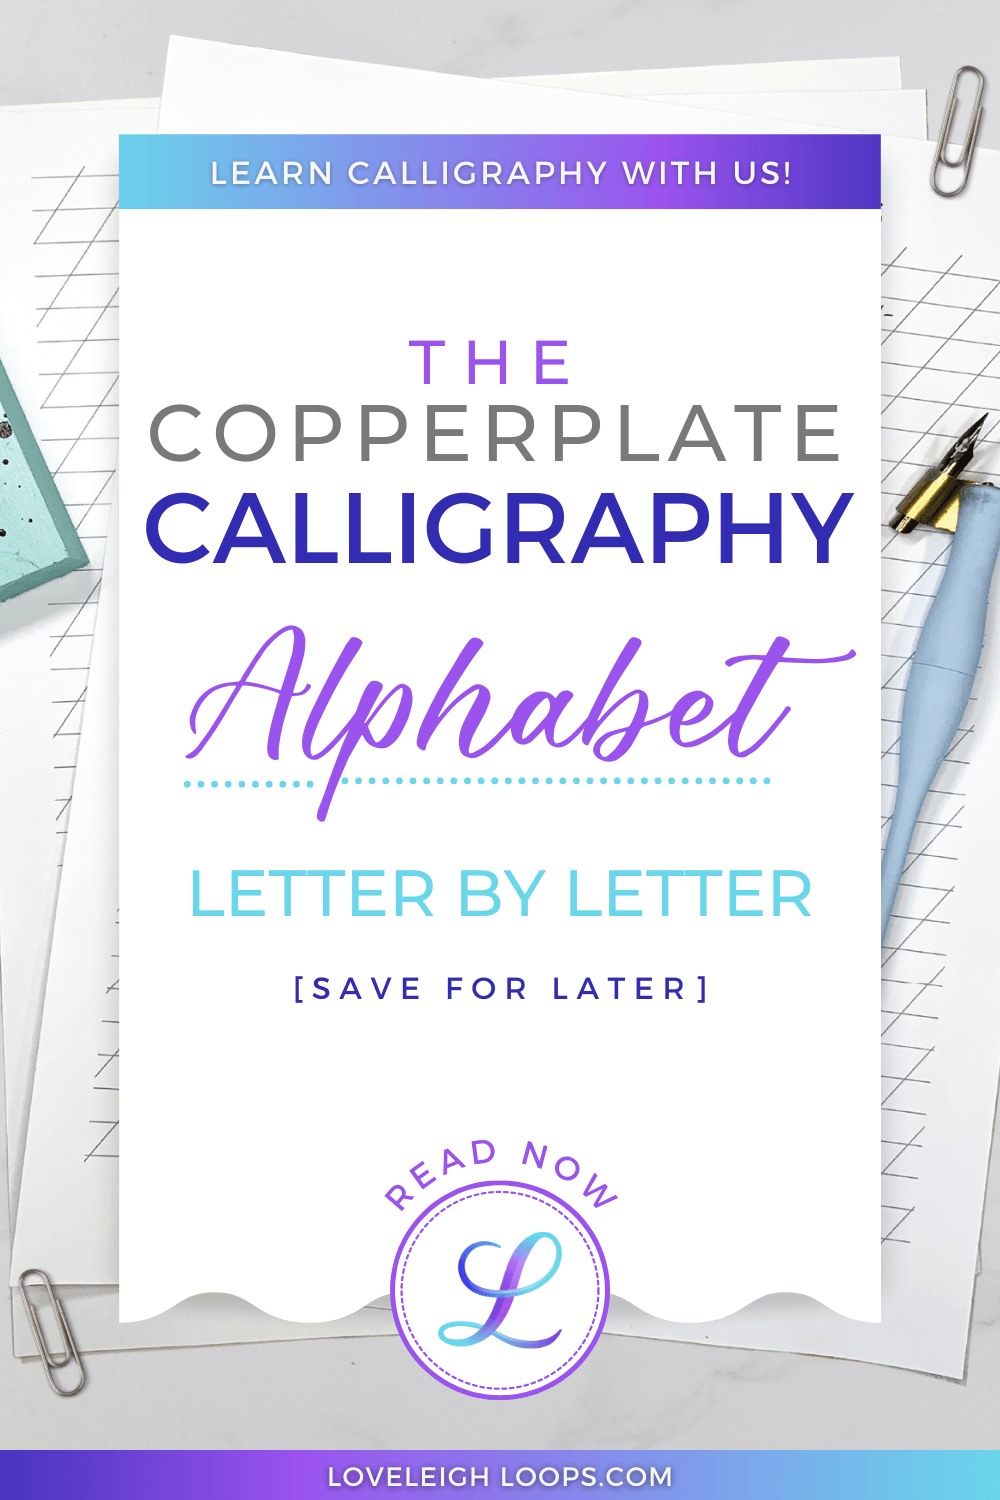 Printable Low Vision Writing Paper - Half Inch - Letter